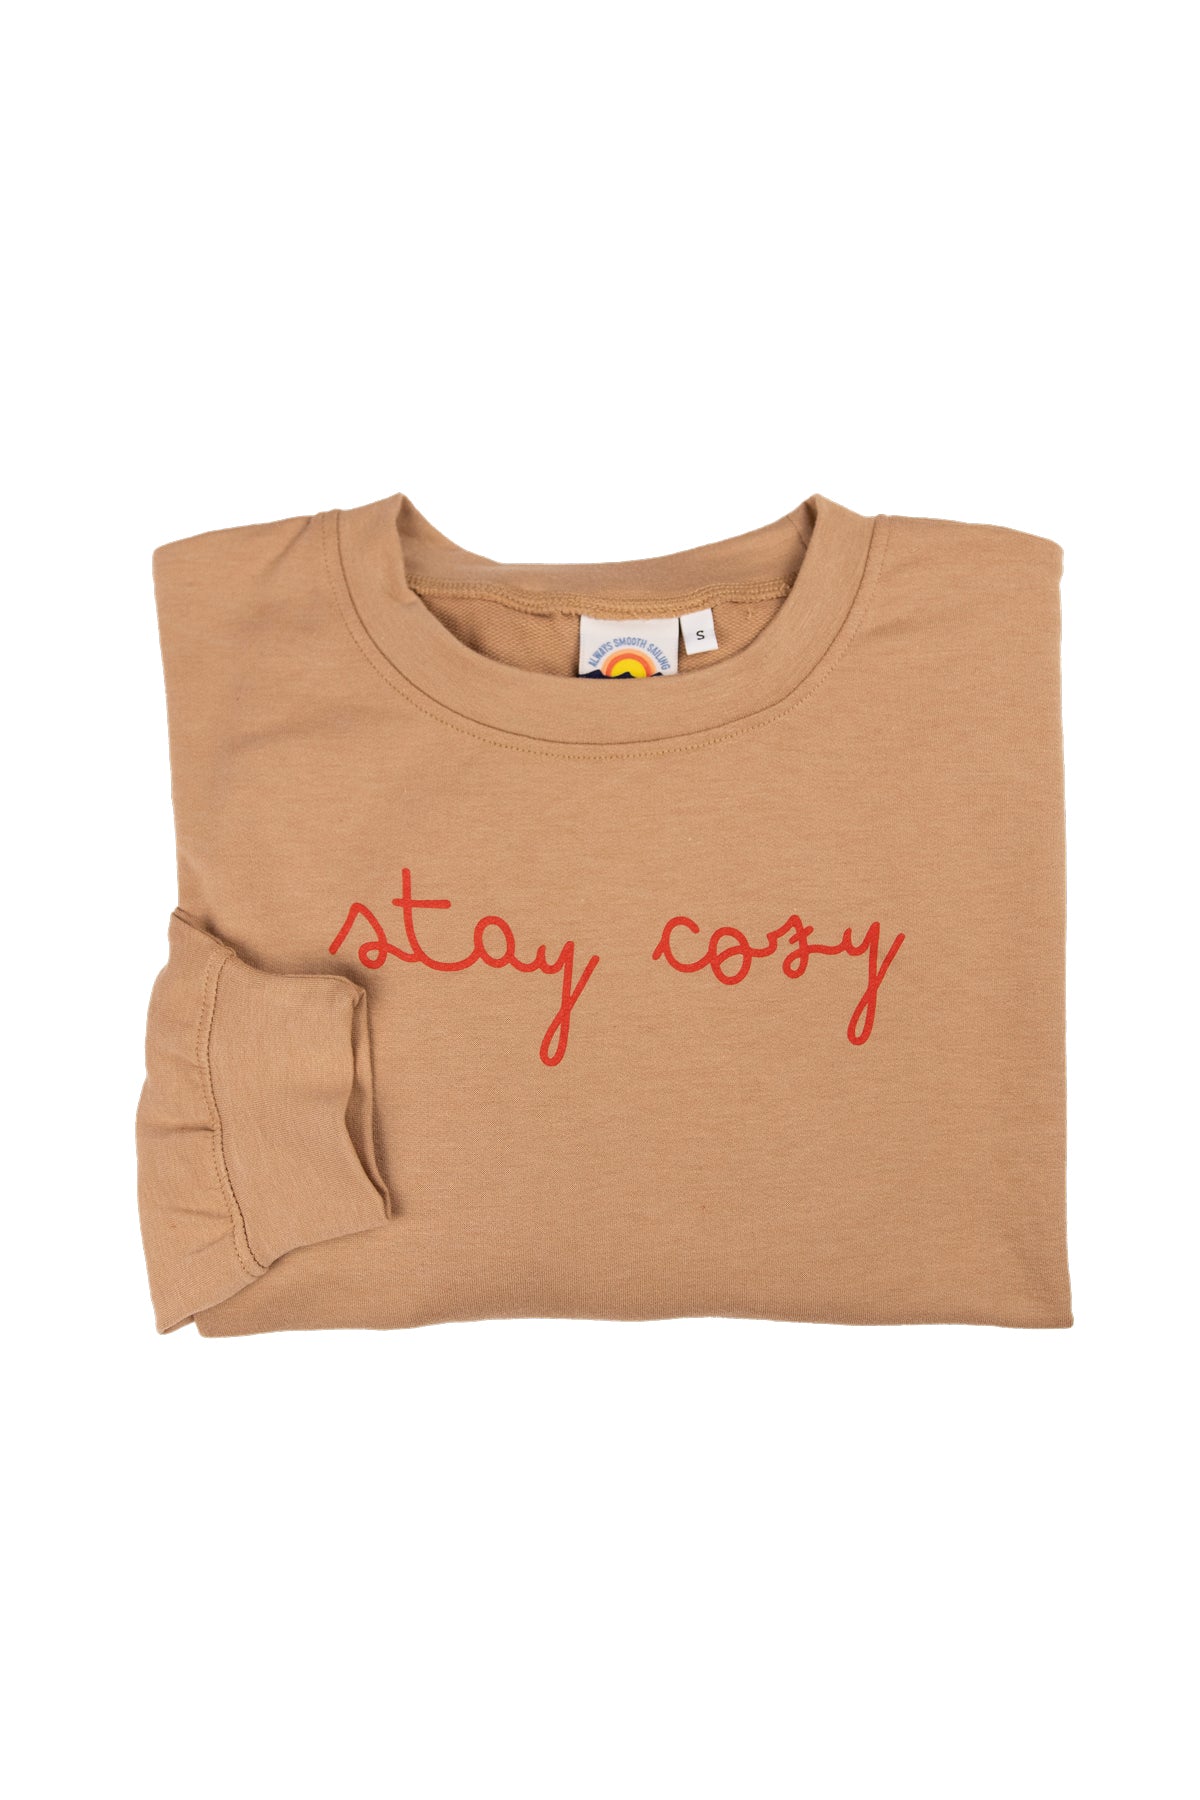 STAY COZY FRENCH TERRY LONG SLEEVE